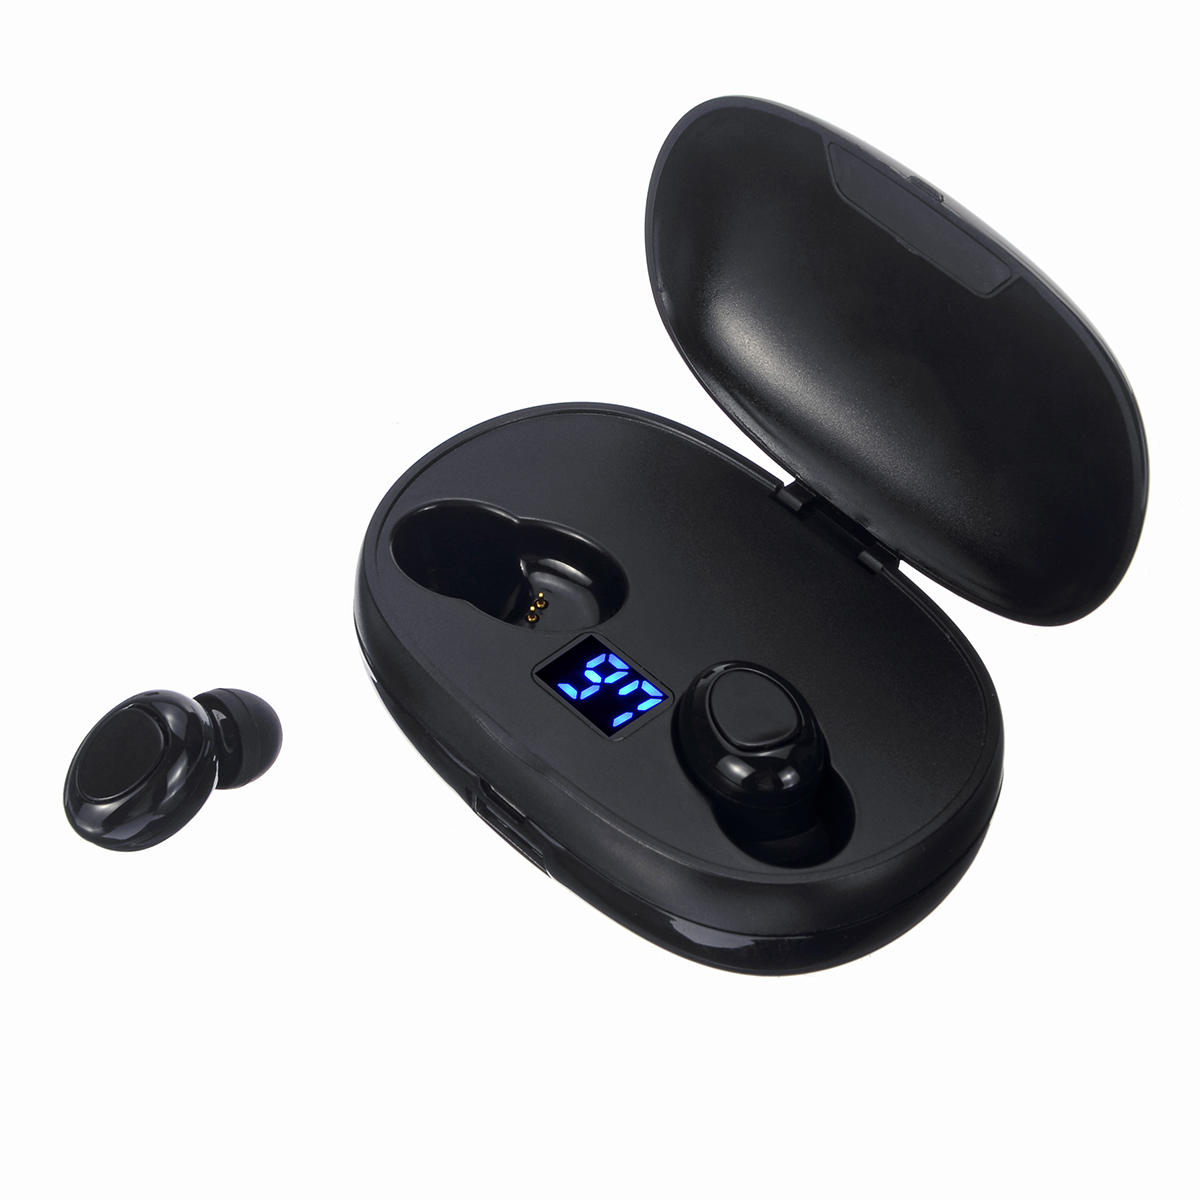 Dual Digital Display True Wireless Headset Button Touch bluetooth 5.0 Earphone with Portable Chargin